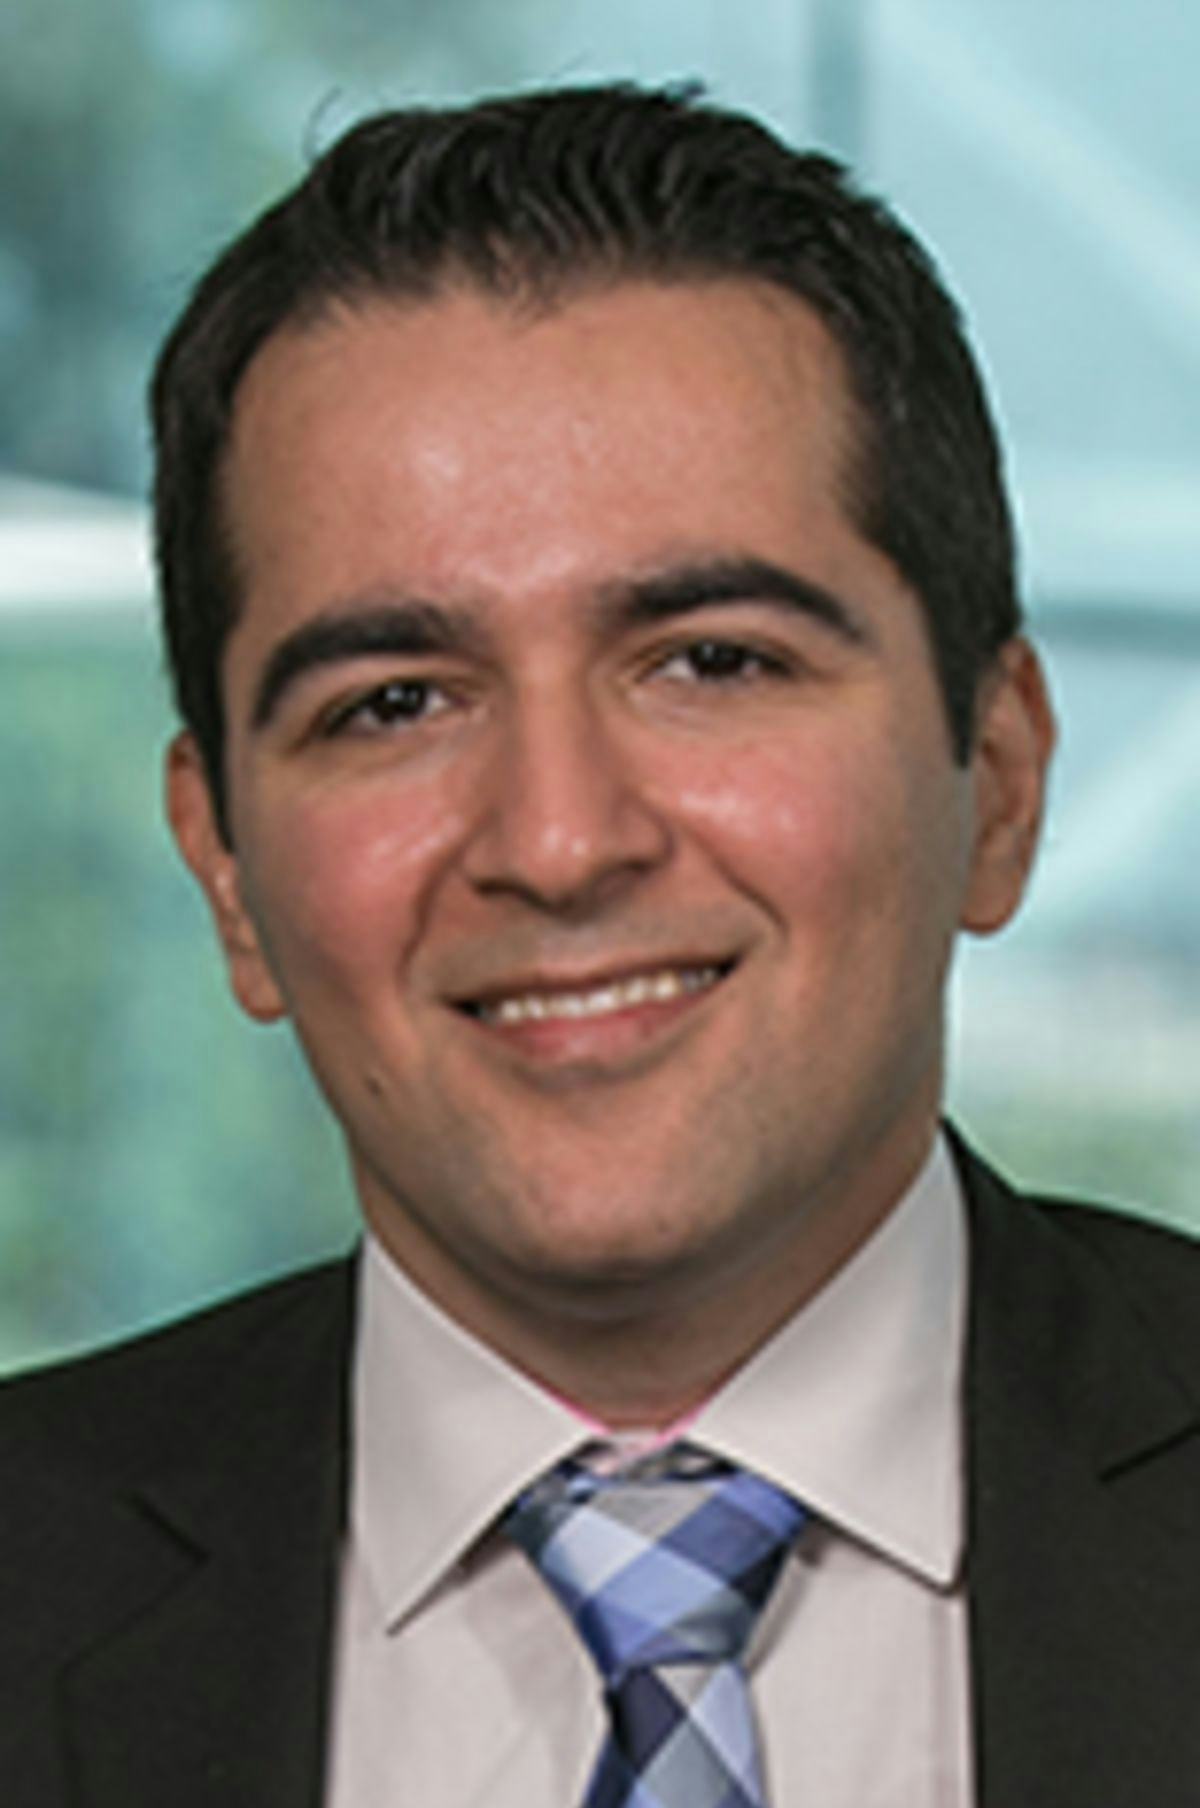 Headshot of Dr. Amir Gandomi with the New York City skyine in the background.